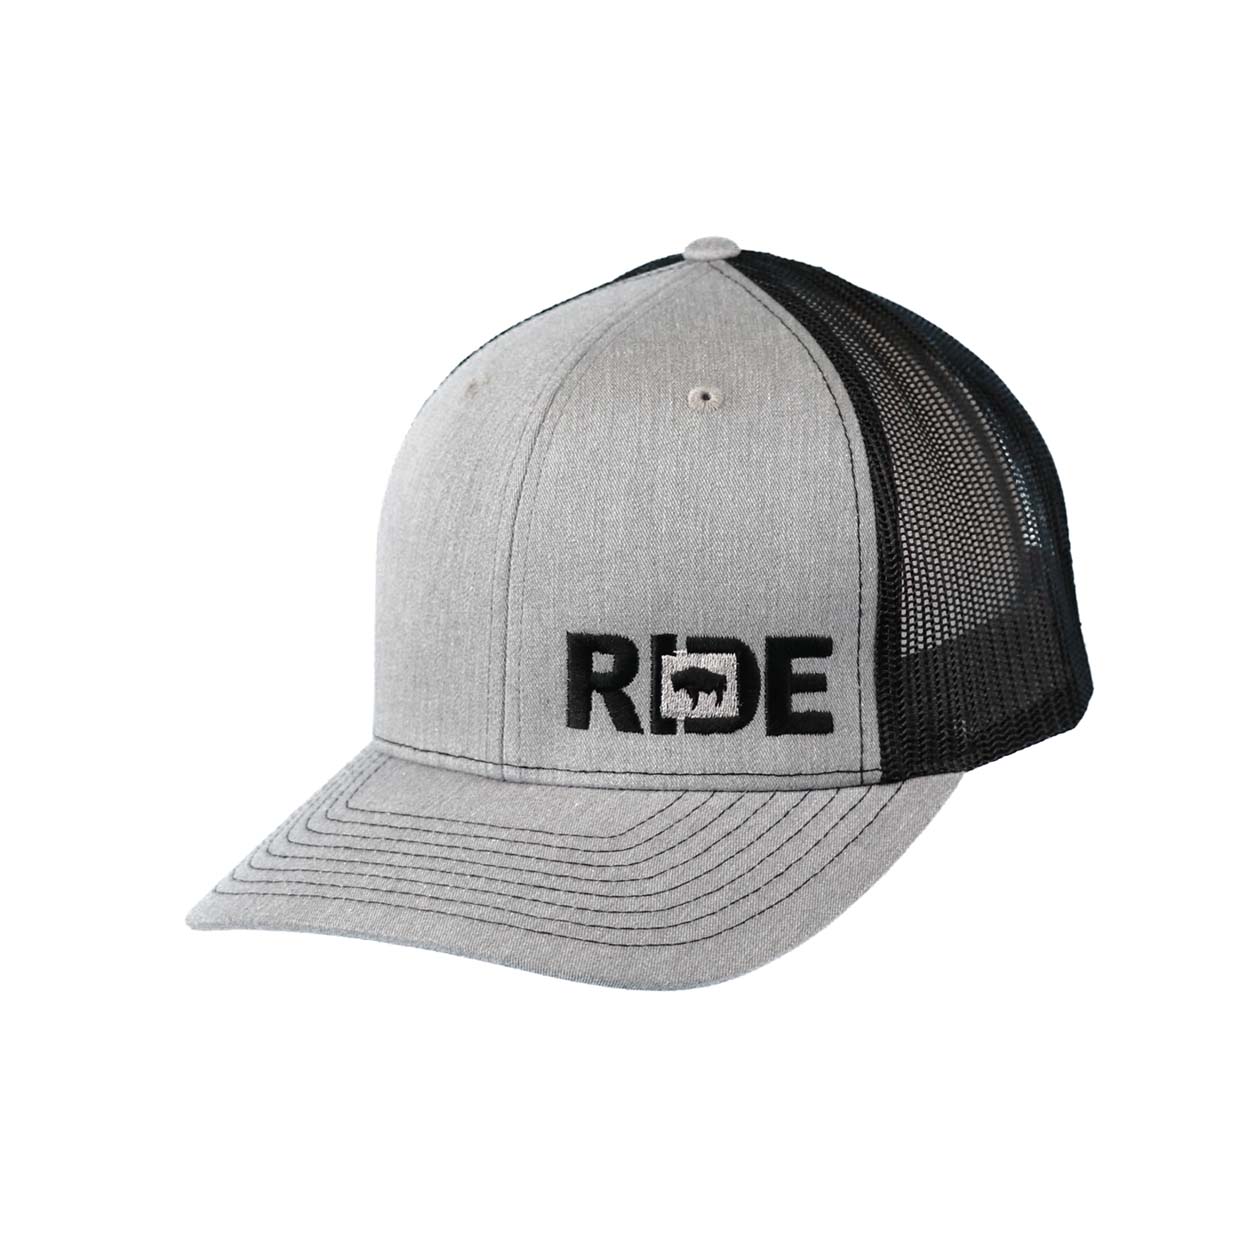 Ride Wyoming Classic Pro Night Out Embroidered Snapback Trucker Hat Heather Gray/Black